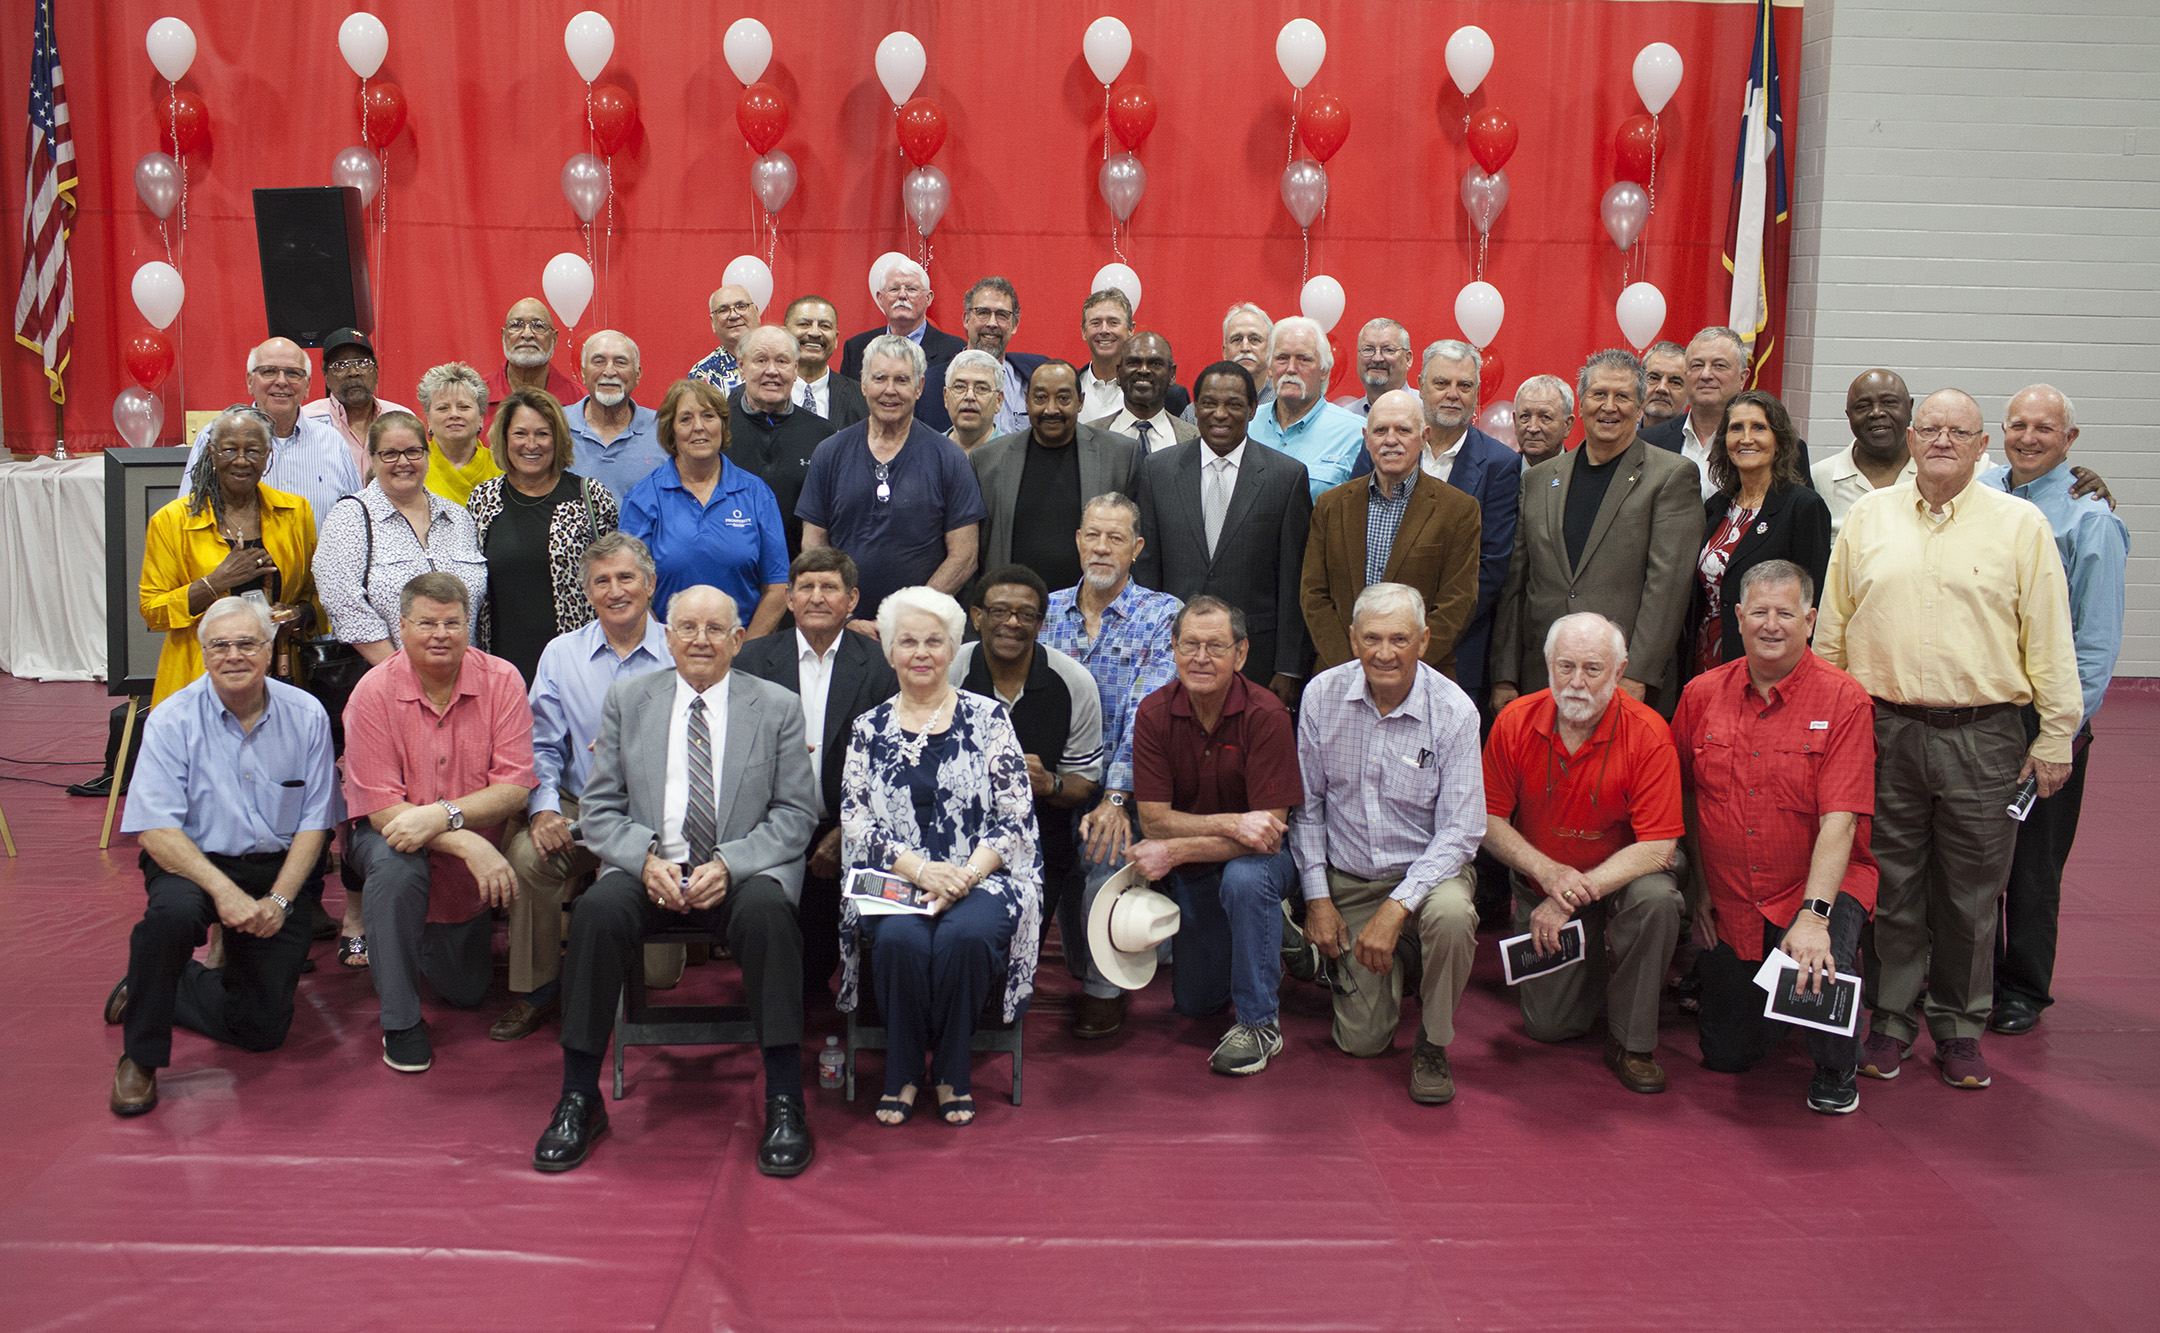 GENE BAHNSEN GYMNASIUM - WCJC names gym in honor of longtime athletic director and coach